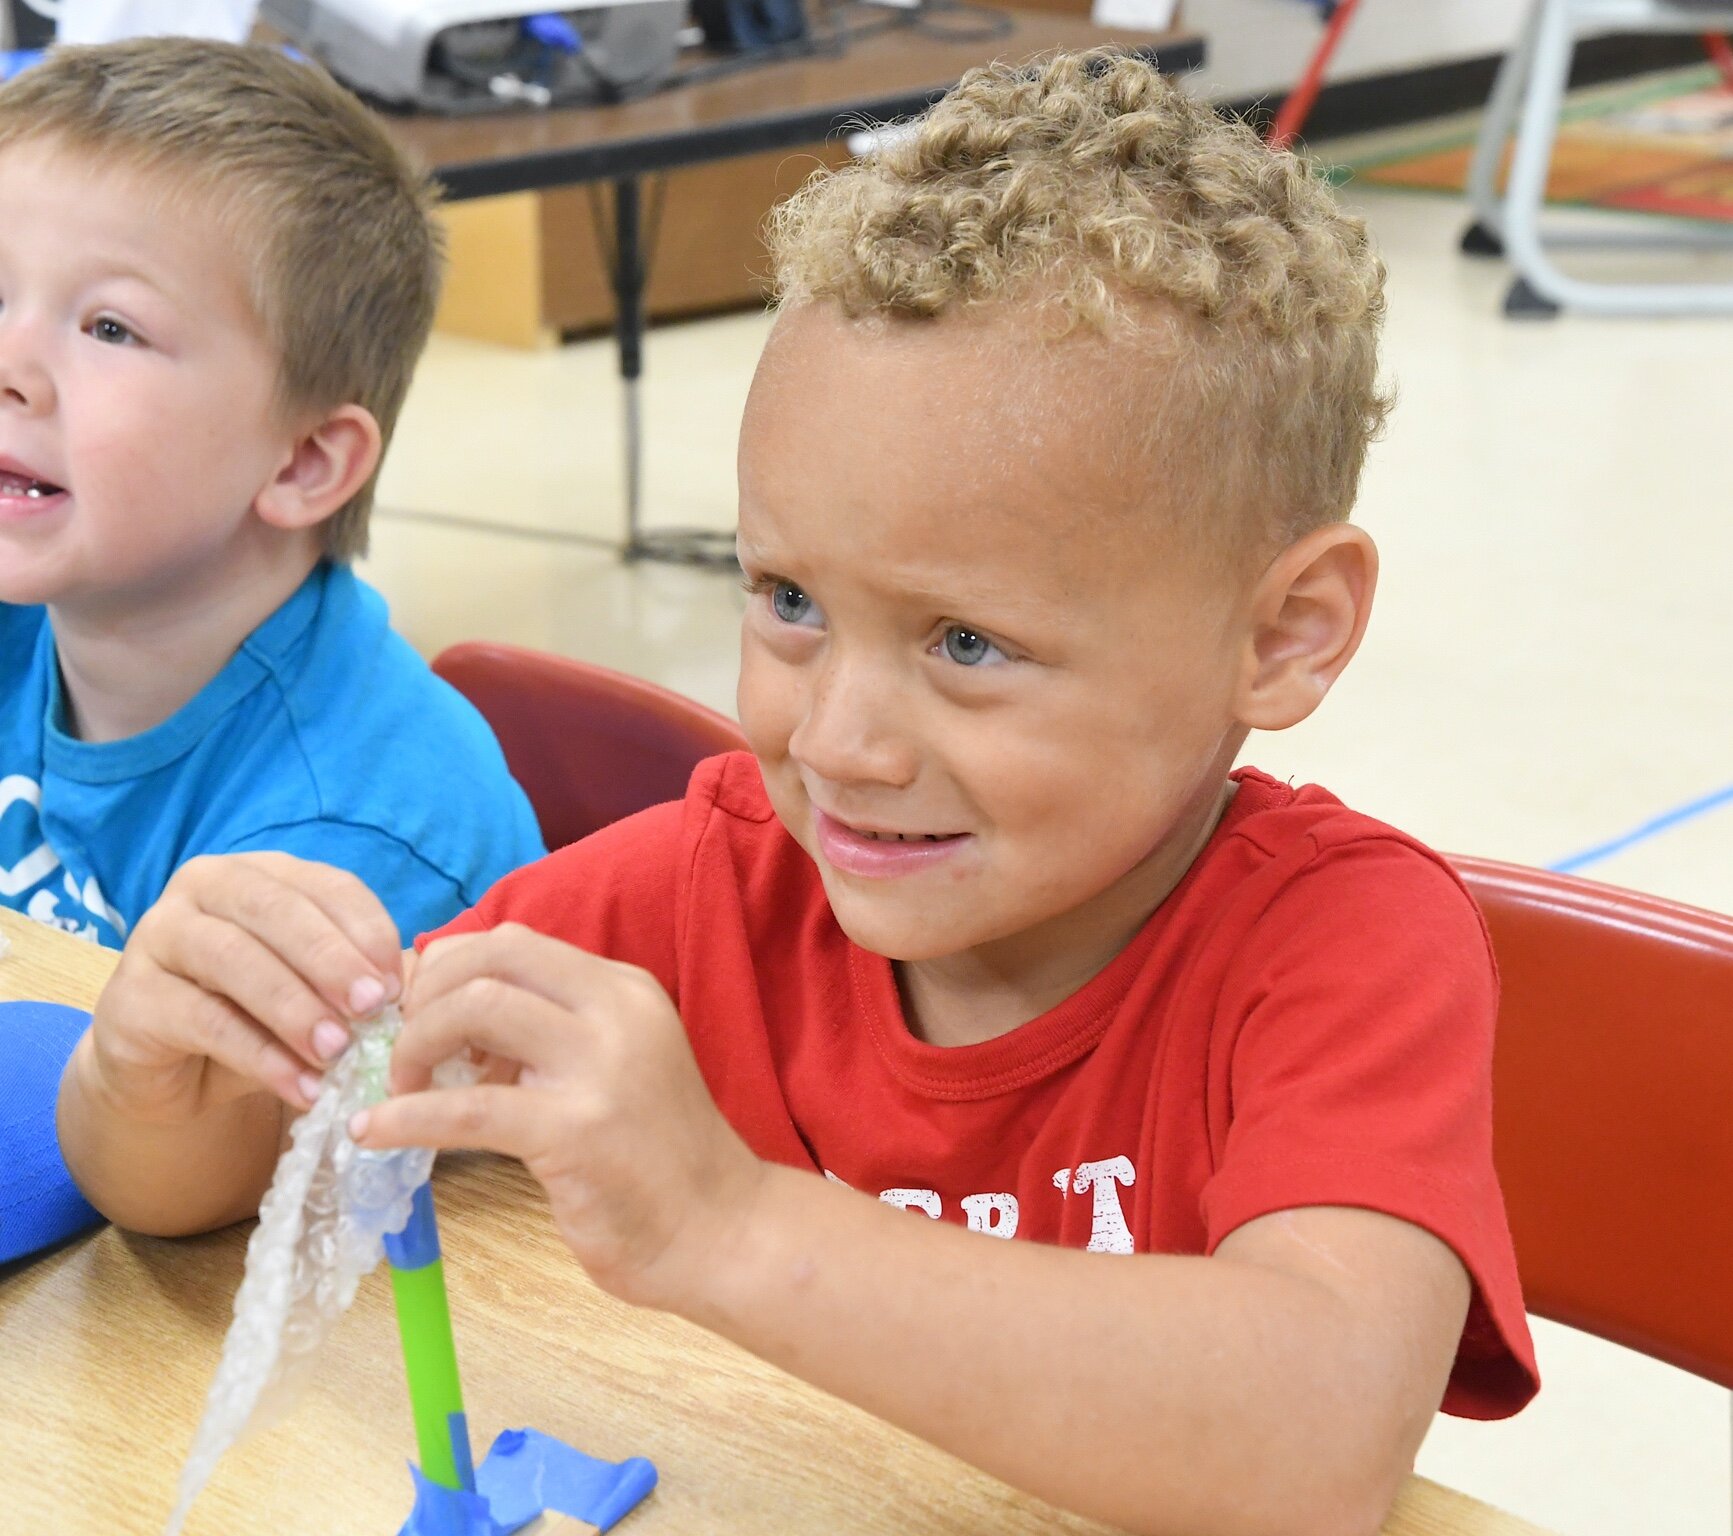 Spencer Miller, partially seen on the left, and Jayden Brown are seen with their boats during a morning session at Franklin-Post Elementary School.